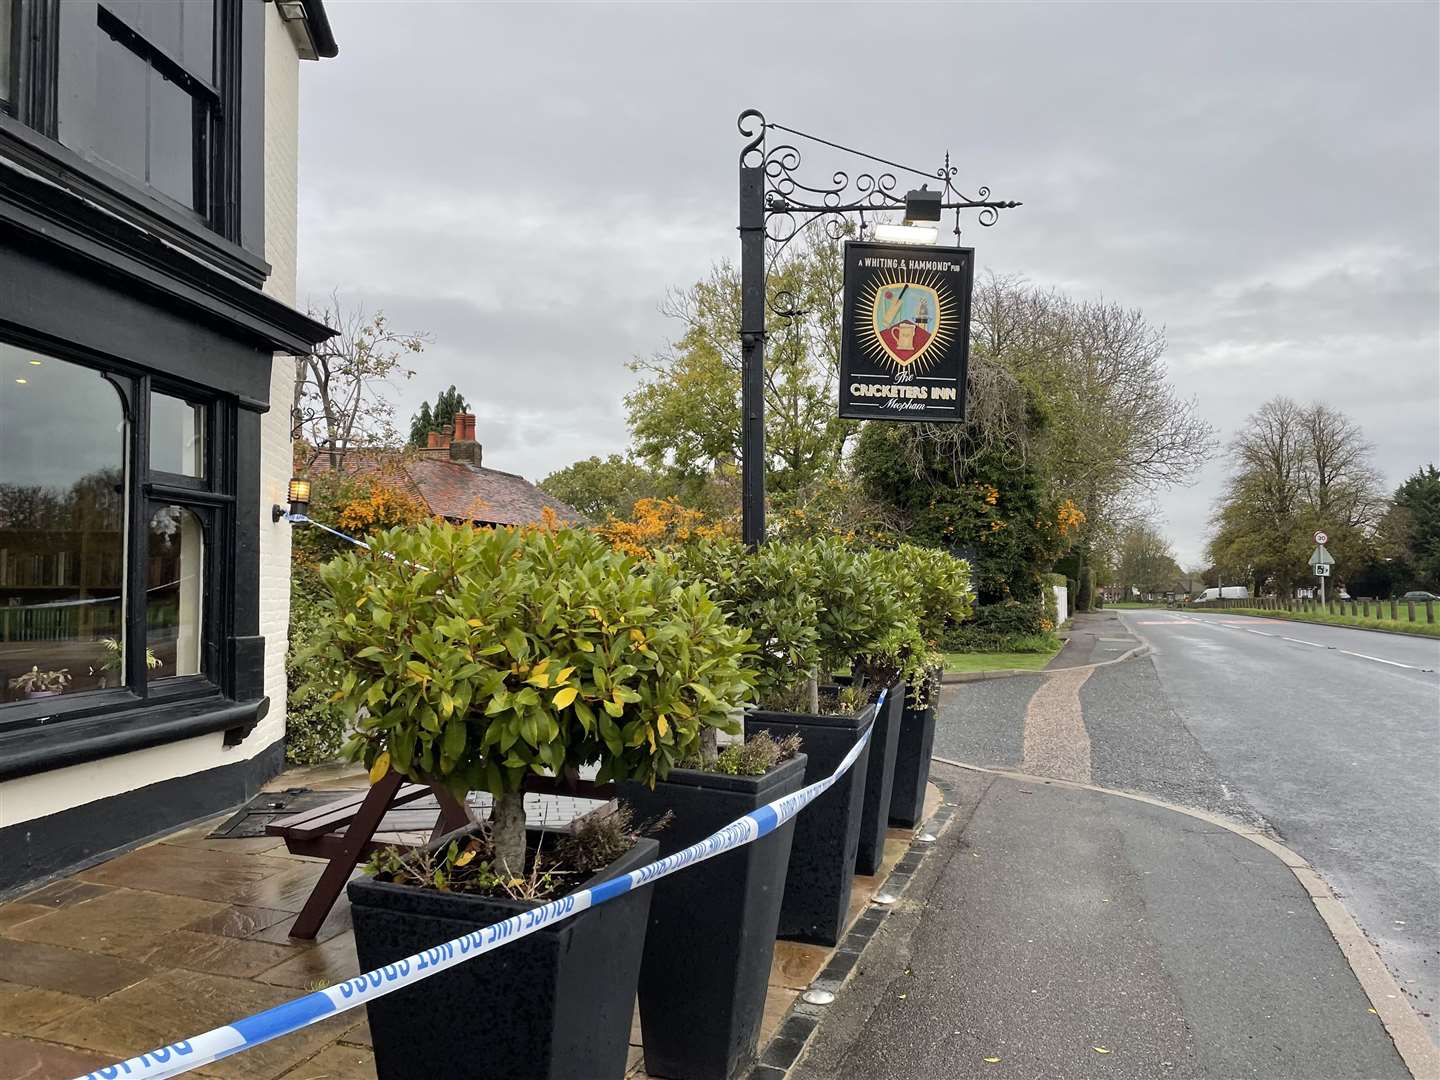 The Cricketers Inn was cordoned off earlier this week